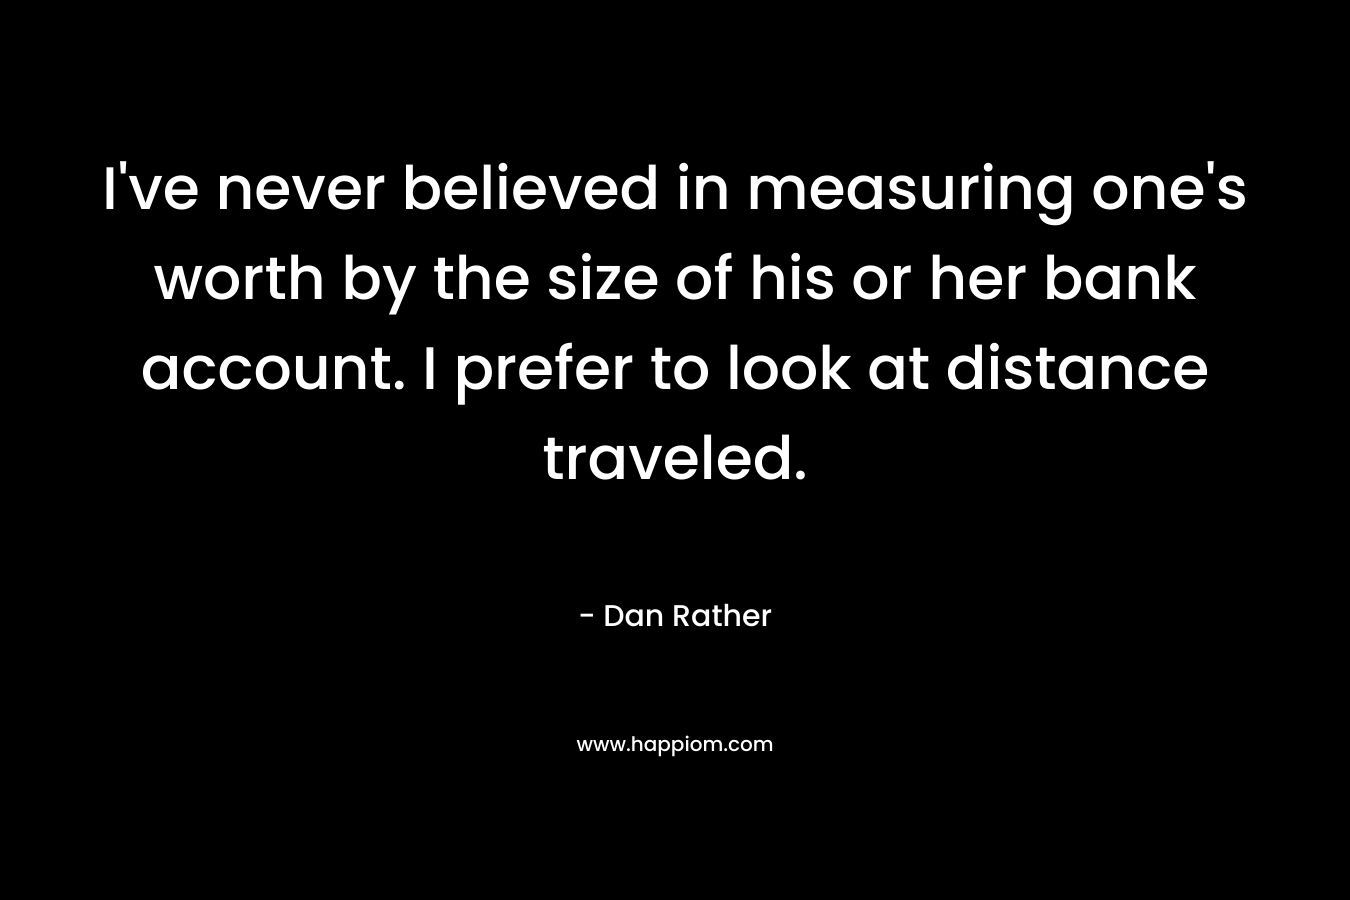 I've never believed in measuring one's worth by the size of his or her bank account. I prefer to look at distance traveled.